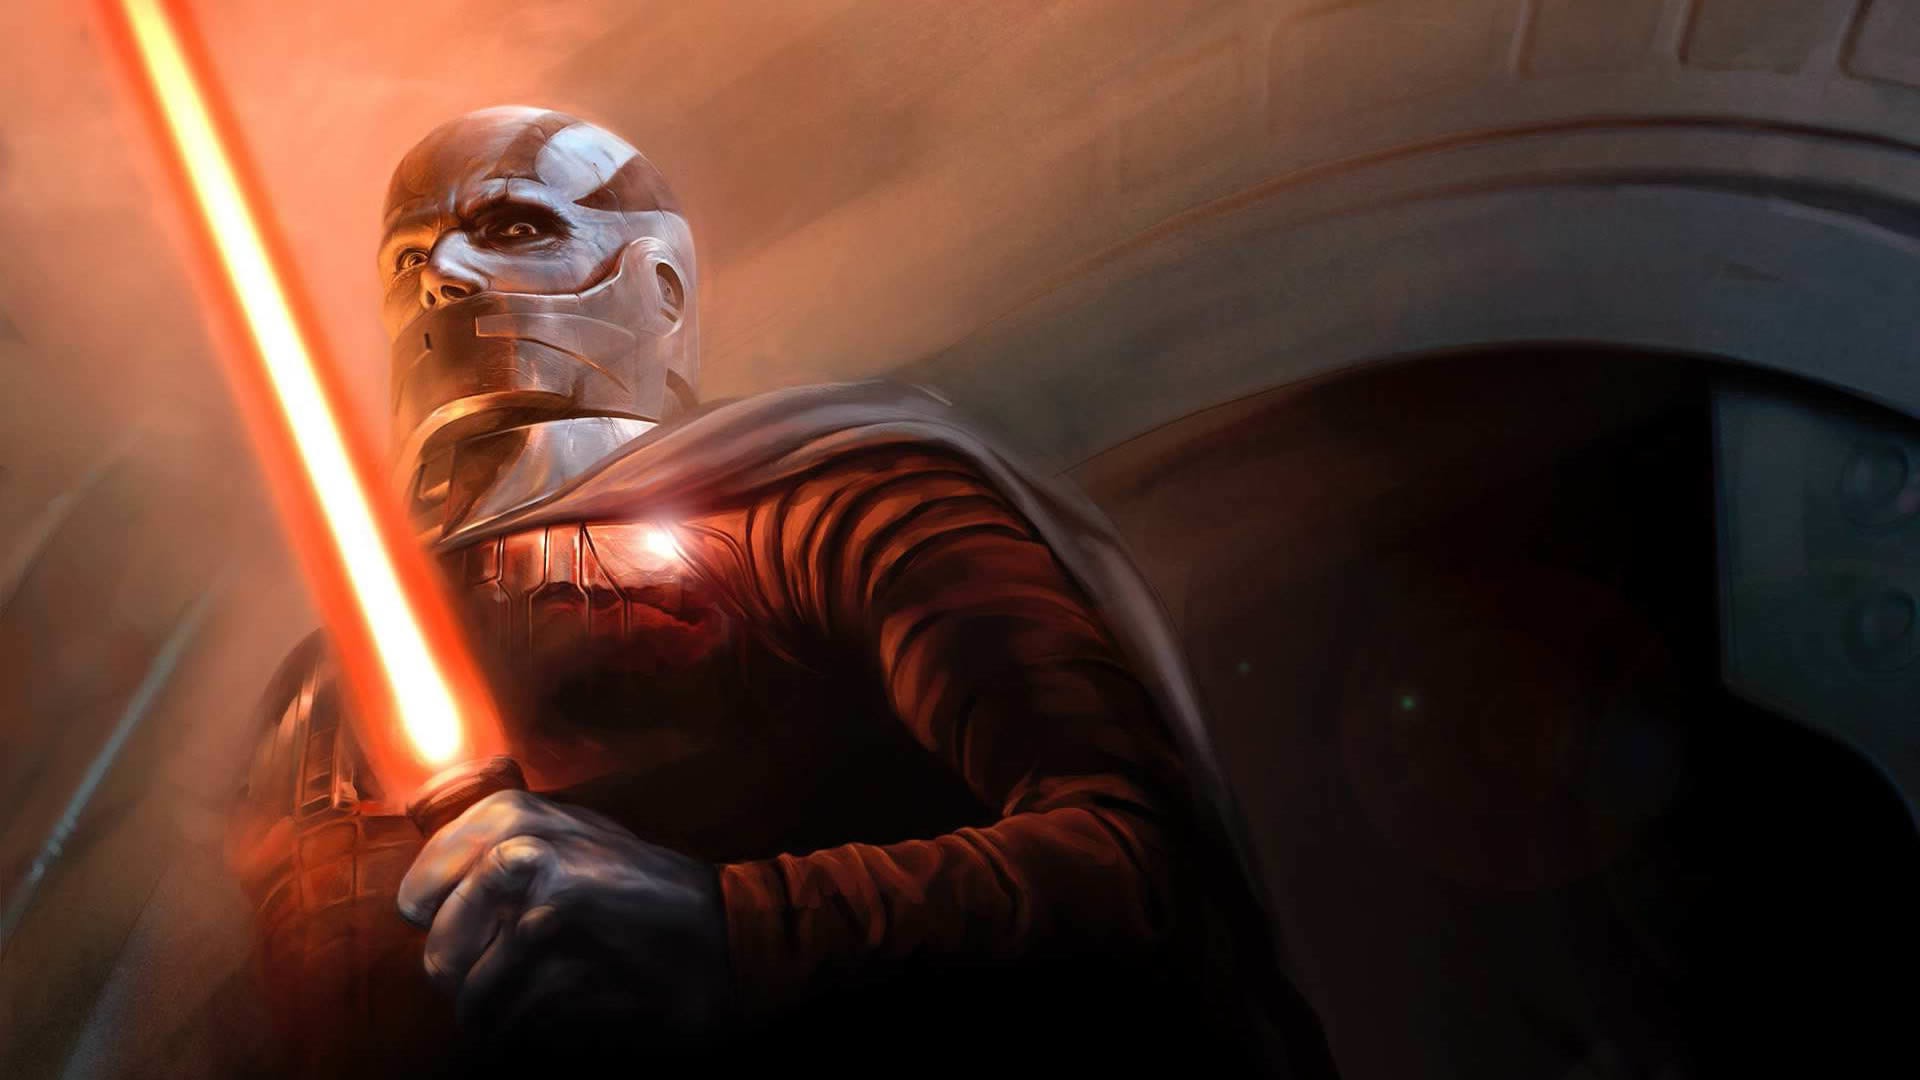 star wars knights of the old republic resolution 1920x1080